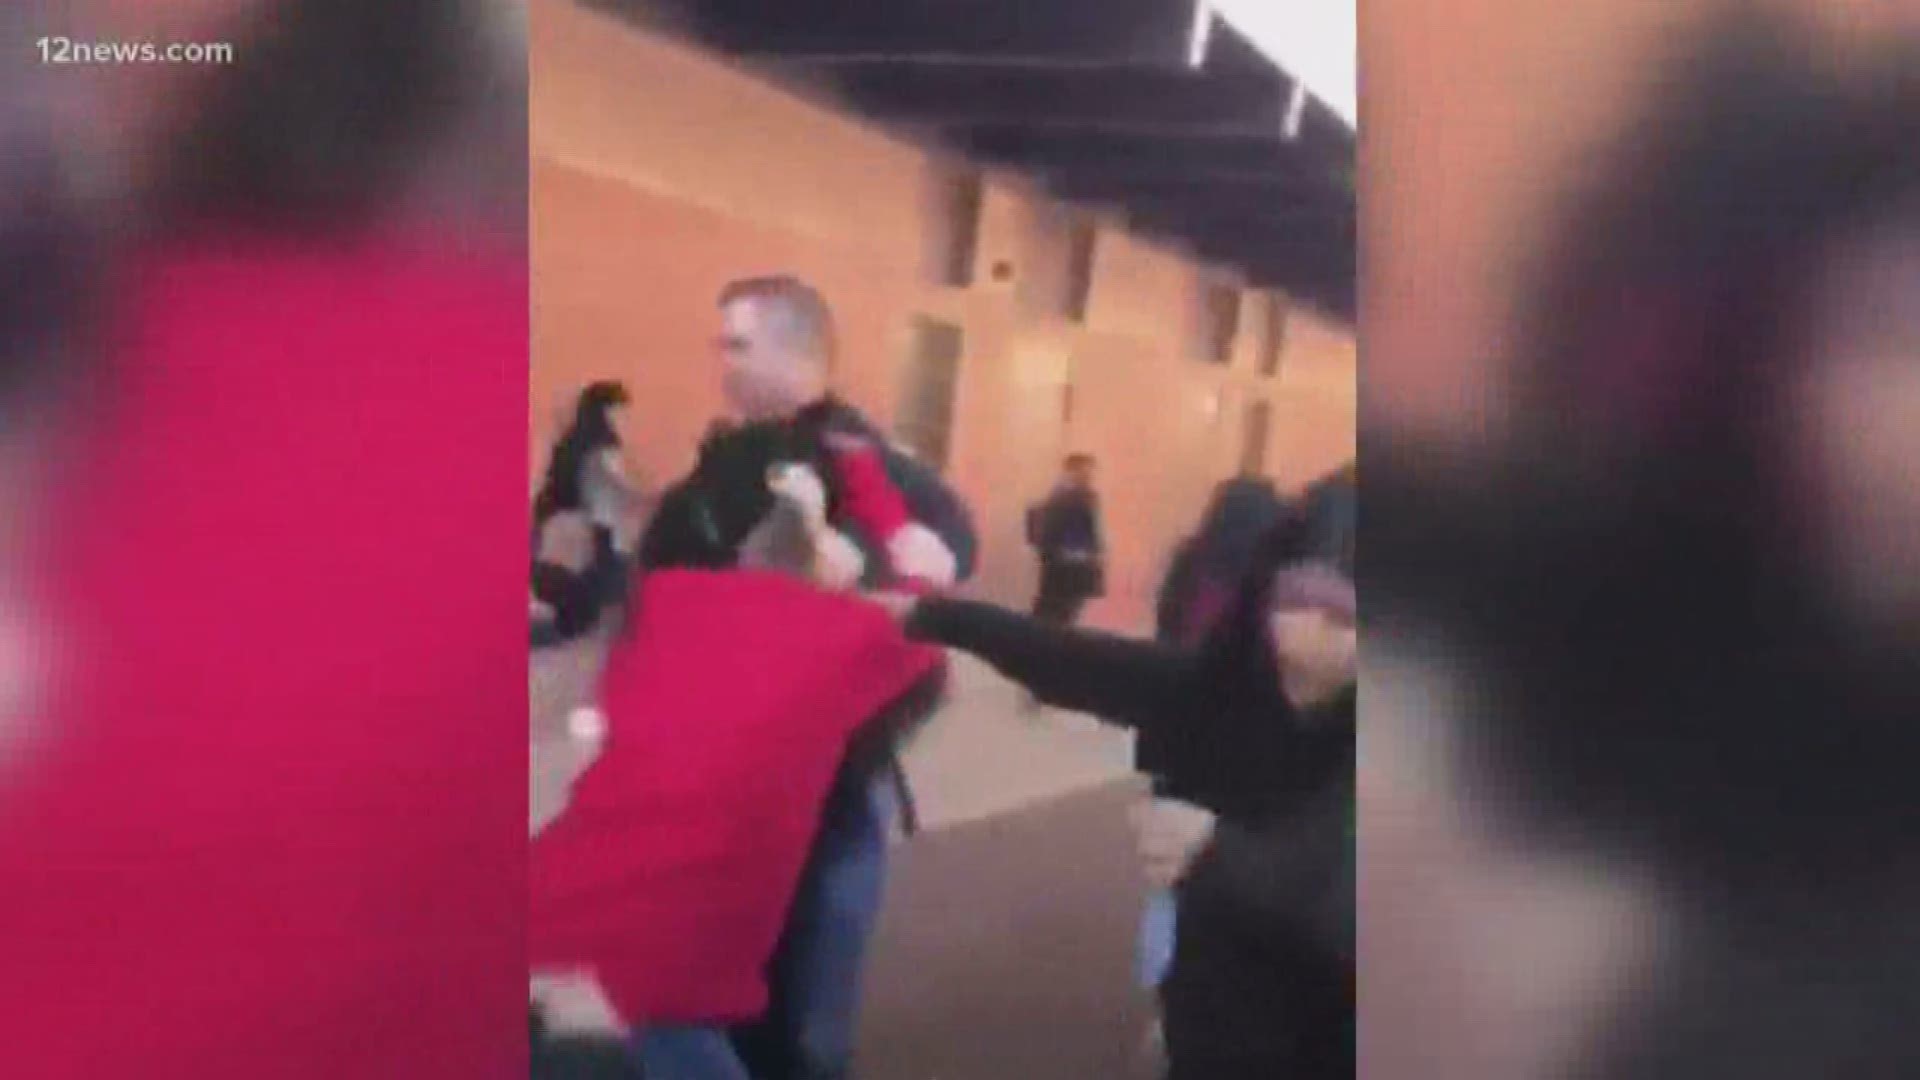 A Phoenix police officer used pepper spray to break up a fight between three 13-year-old girls at Isaac Middle School earlier this month.